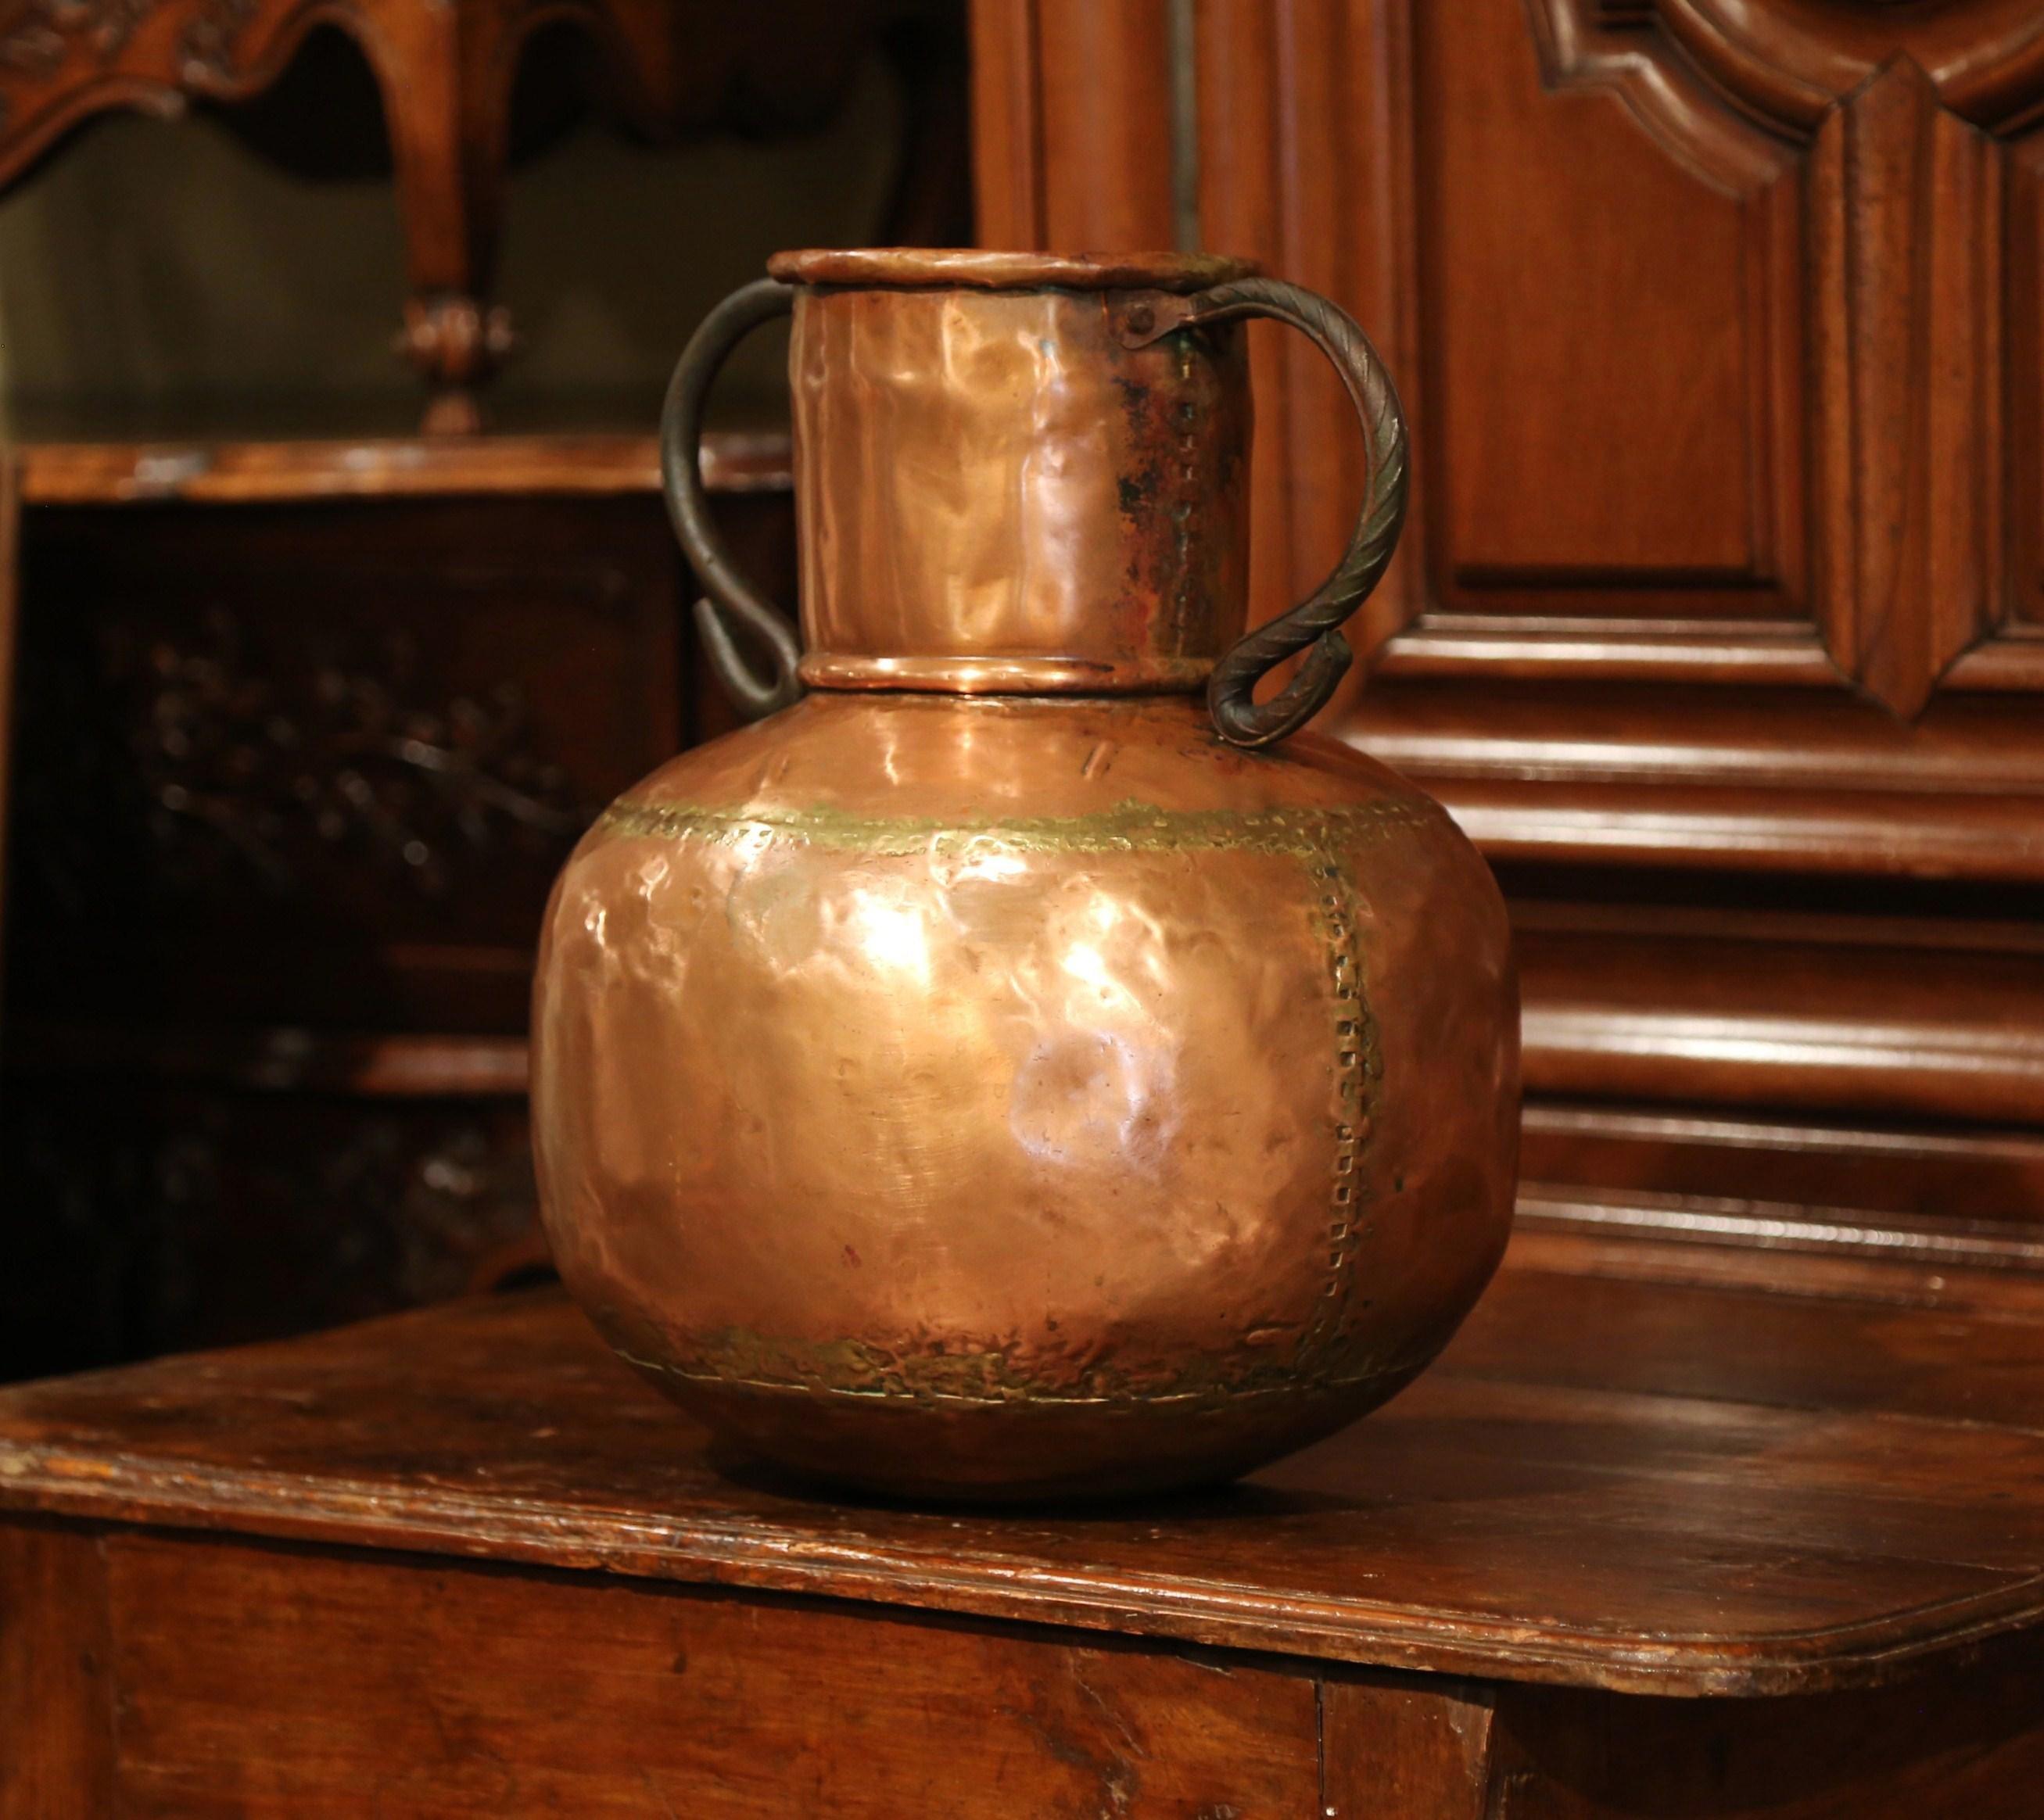 This large, copper vase is a French country essential. Wide, durable and traditional in shape, this copper pot could be used as an umbrella stand, or as a vase to hold dried flowers. Crafted in France circa 1780, the antique vase has a long, tall